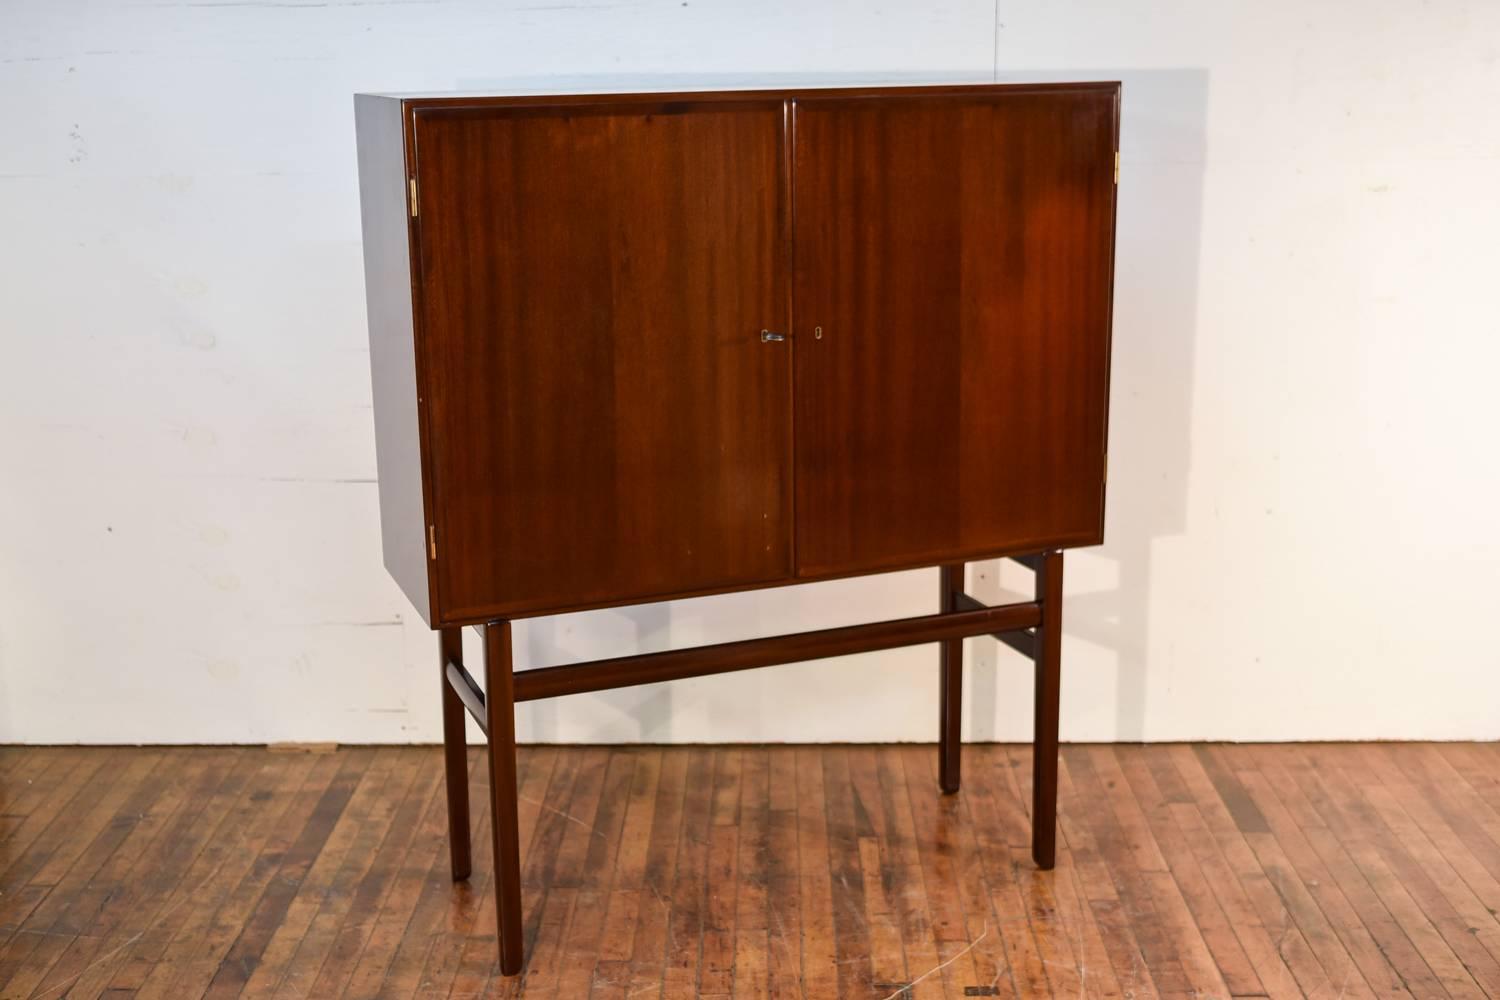 A stunning Danish midcentury mahogany Rungstedlund high cupboard designed by Ole Wanscher was produced during the 1960s and 1970s by Poul Jeppesen Furniture in St Heddinge, Denmark. It was designed for the dining room set called Rungstedlund, named